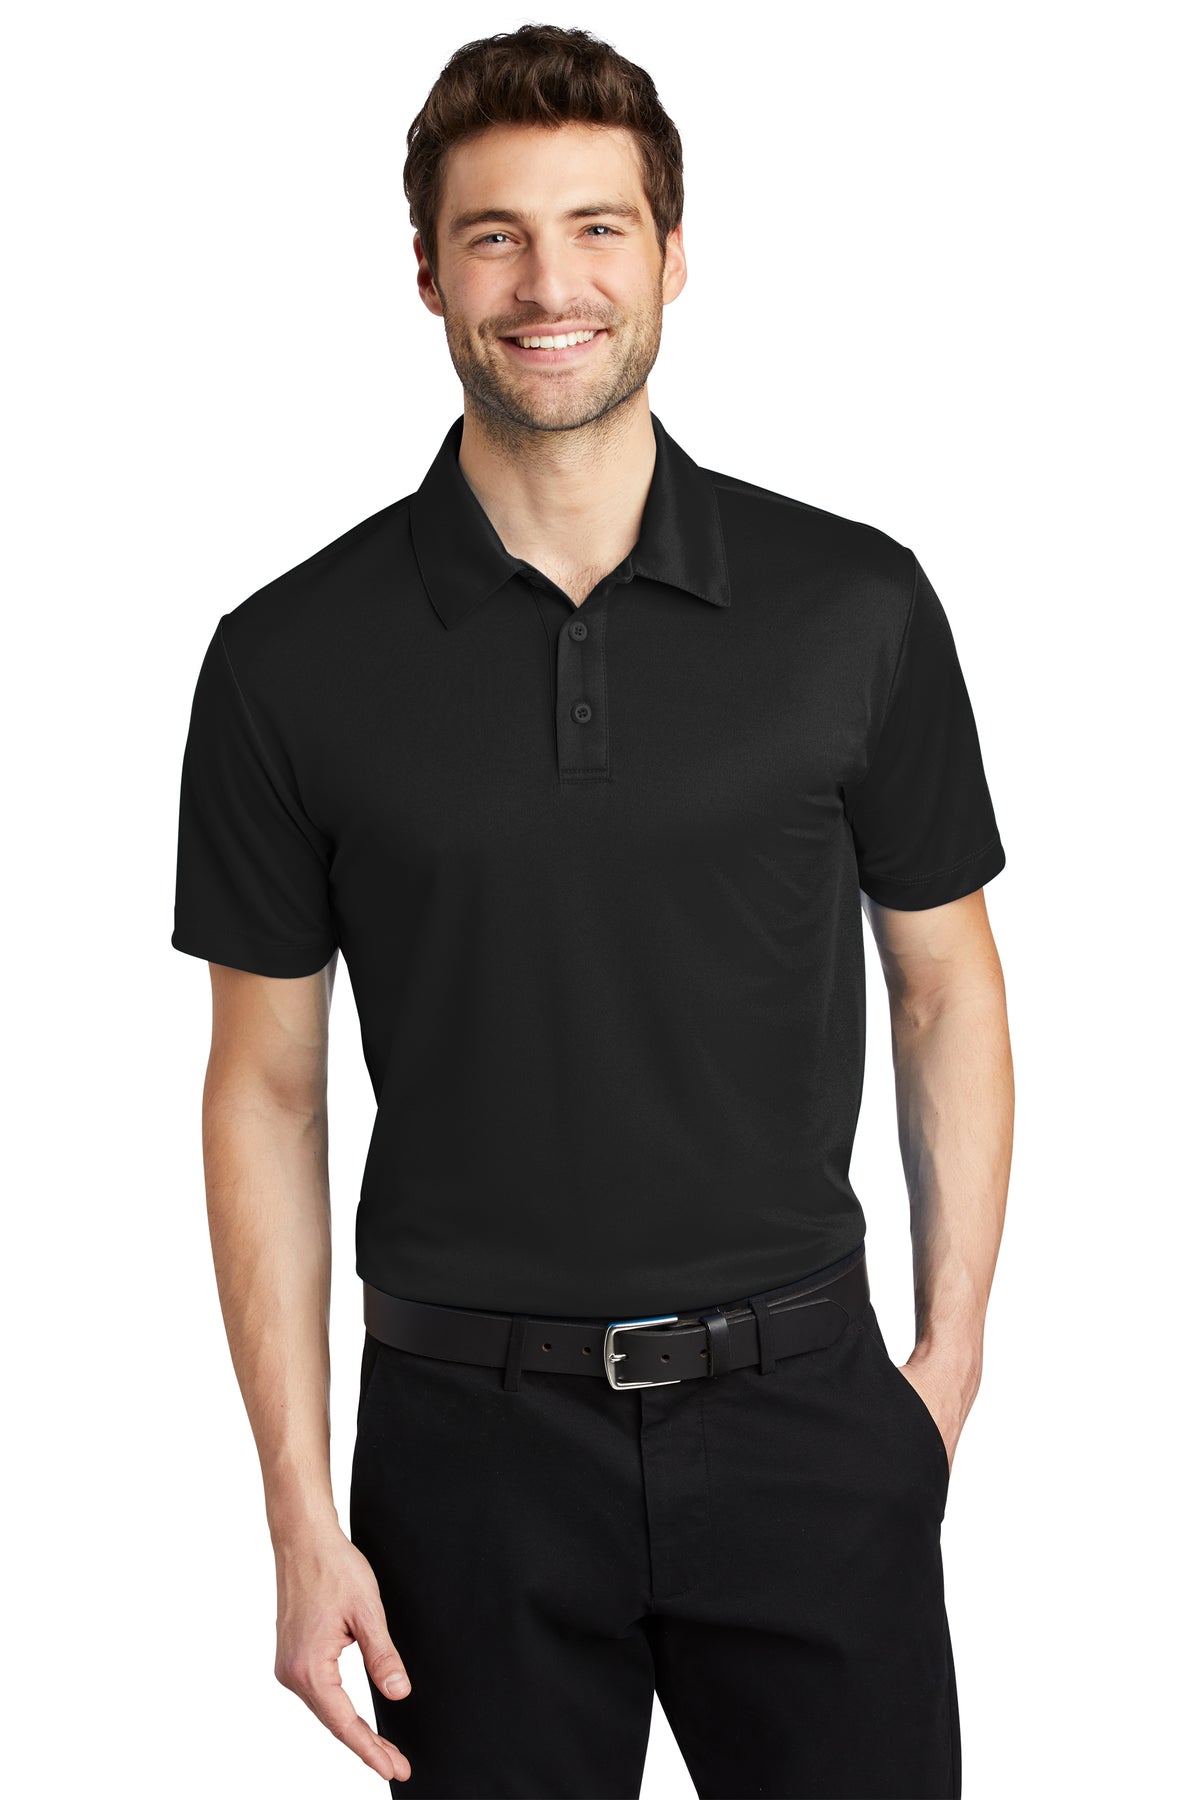 Port Authority K540 Silk Touch Performance Polo Top Black